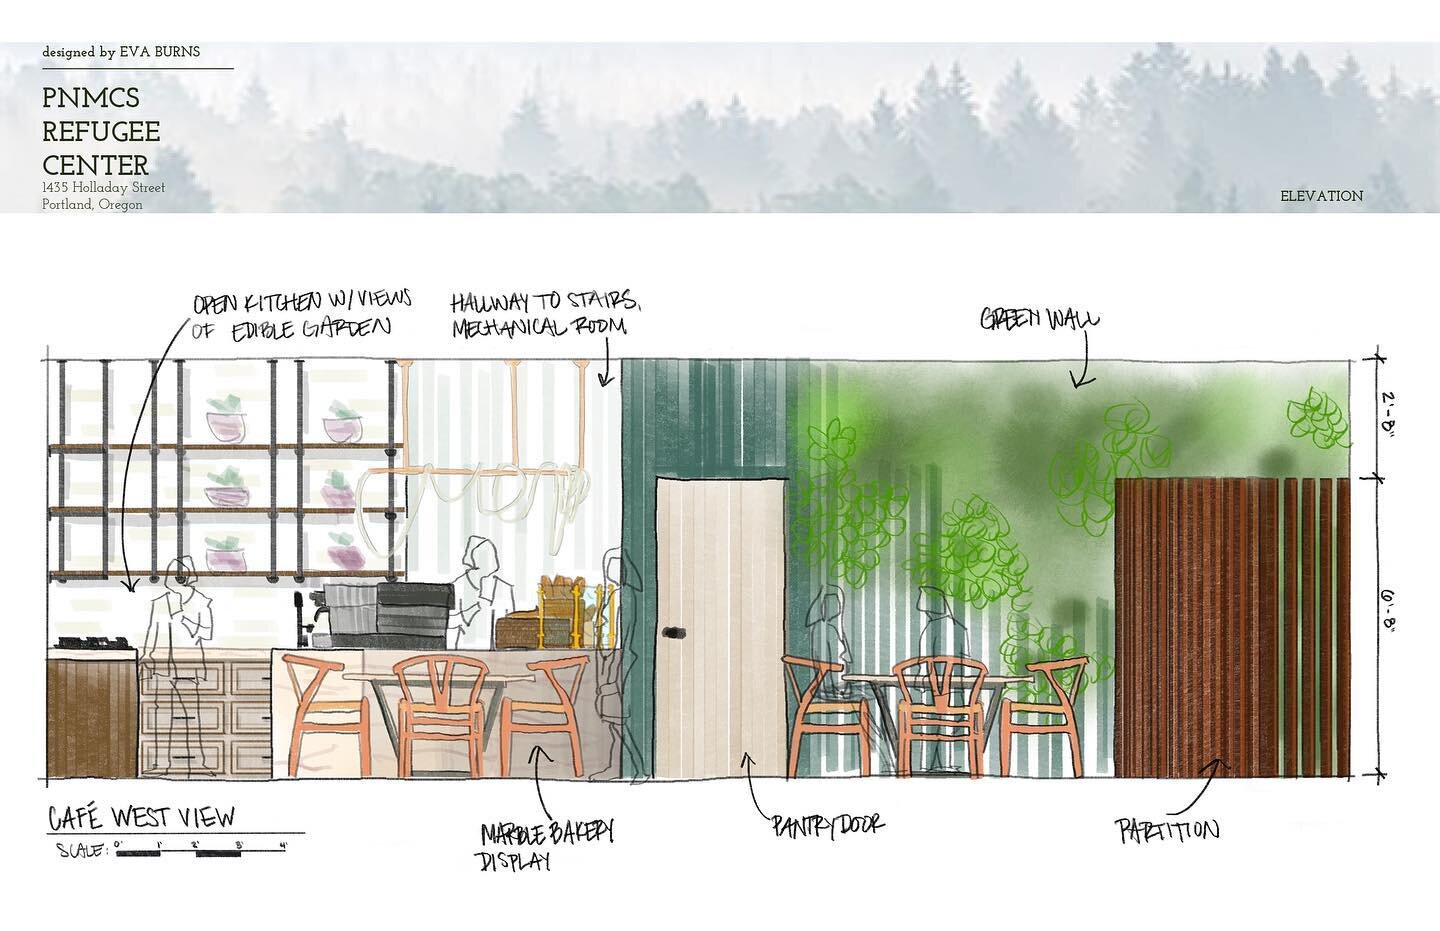 Rendered elevations and furniture plan. This is a project I&rsquo;ve been working on for school for the past two and half months. It&rsquo;s a refugee center in Portland, OR. It&rsquo;s all make believe, but I still try to push myself to find the bes